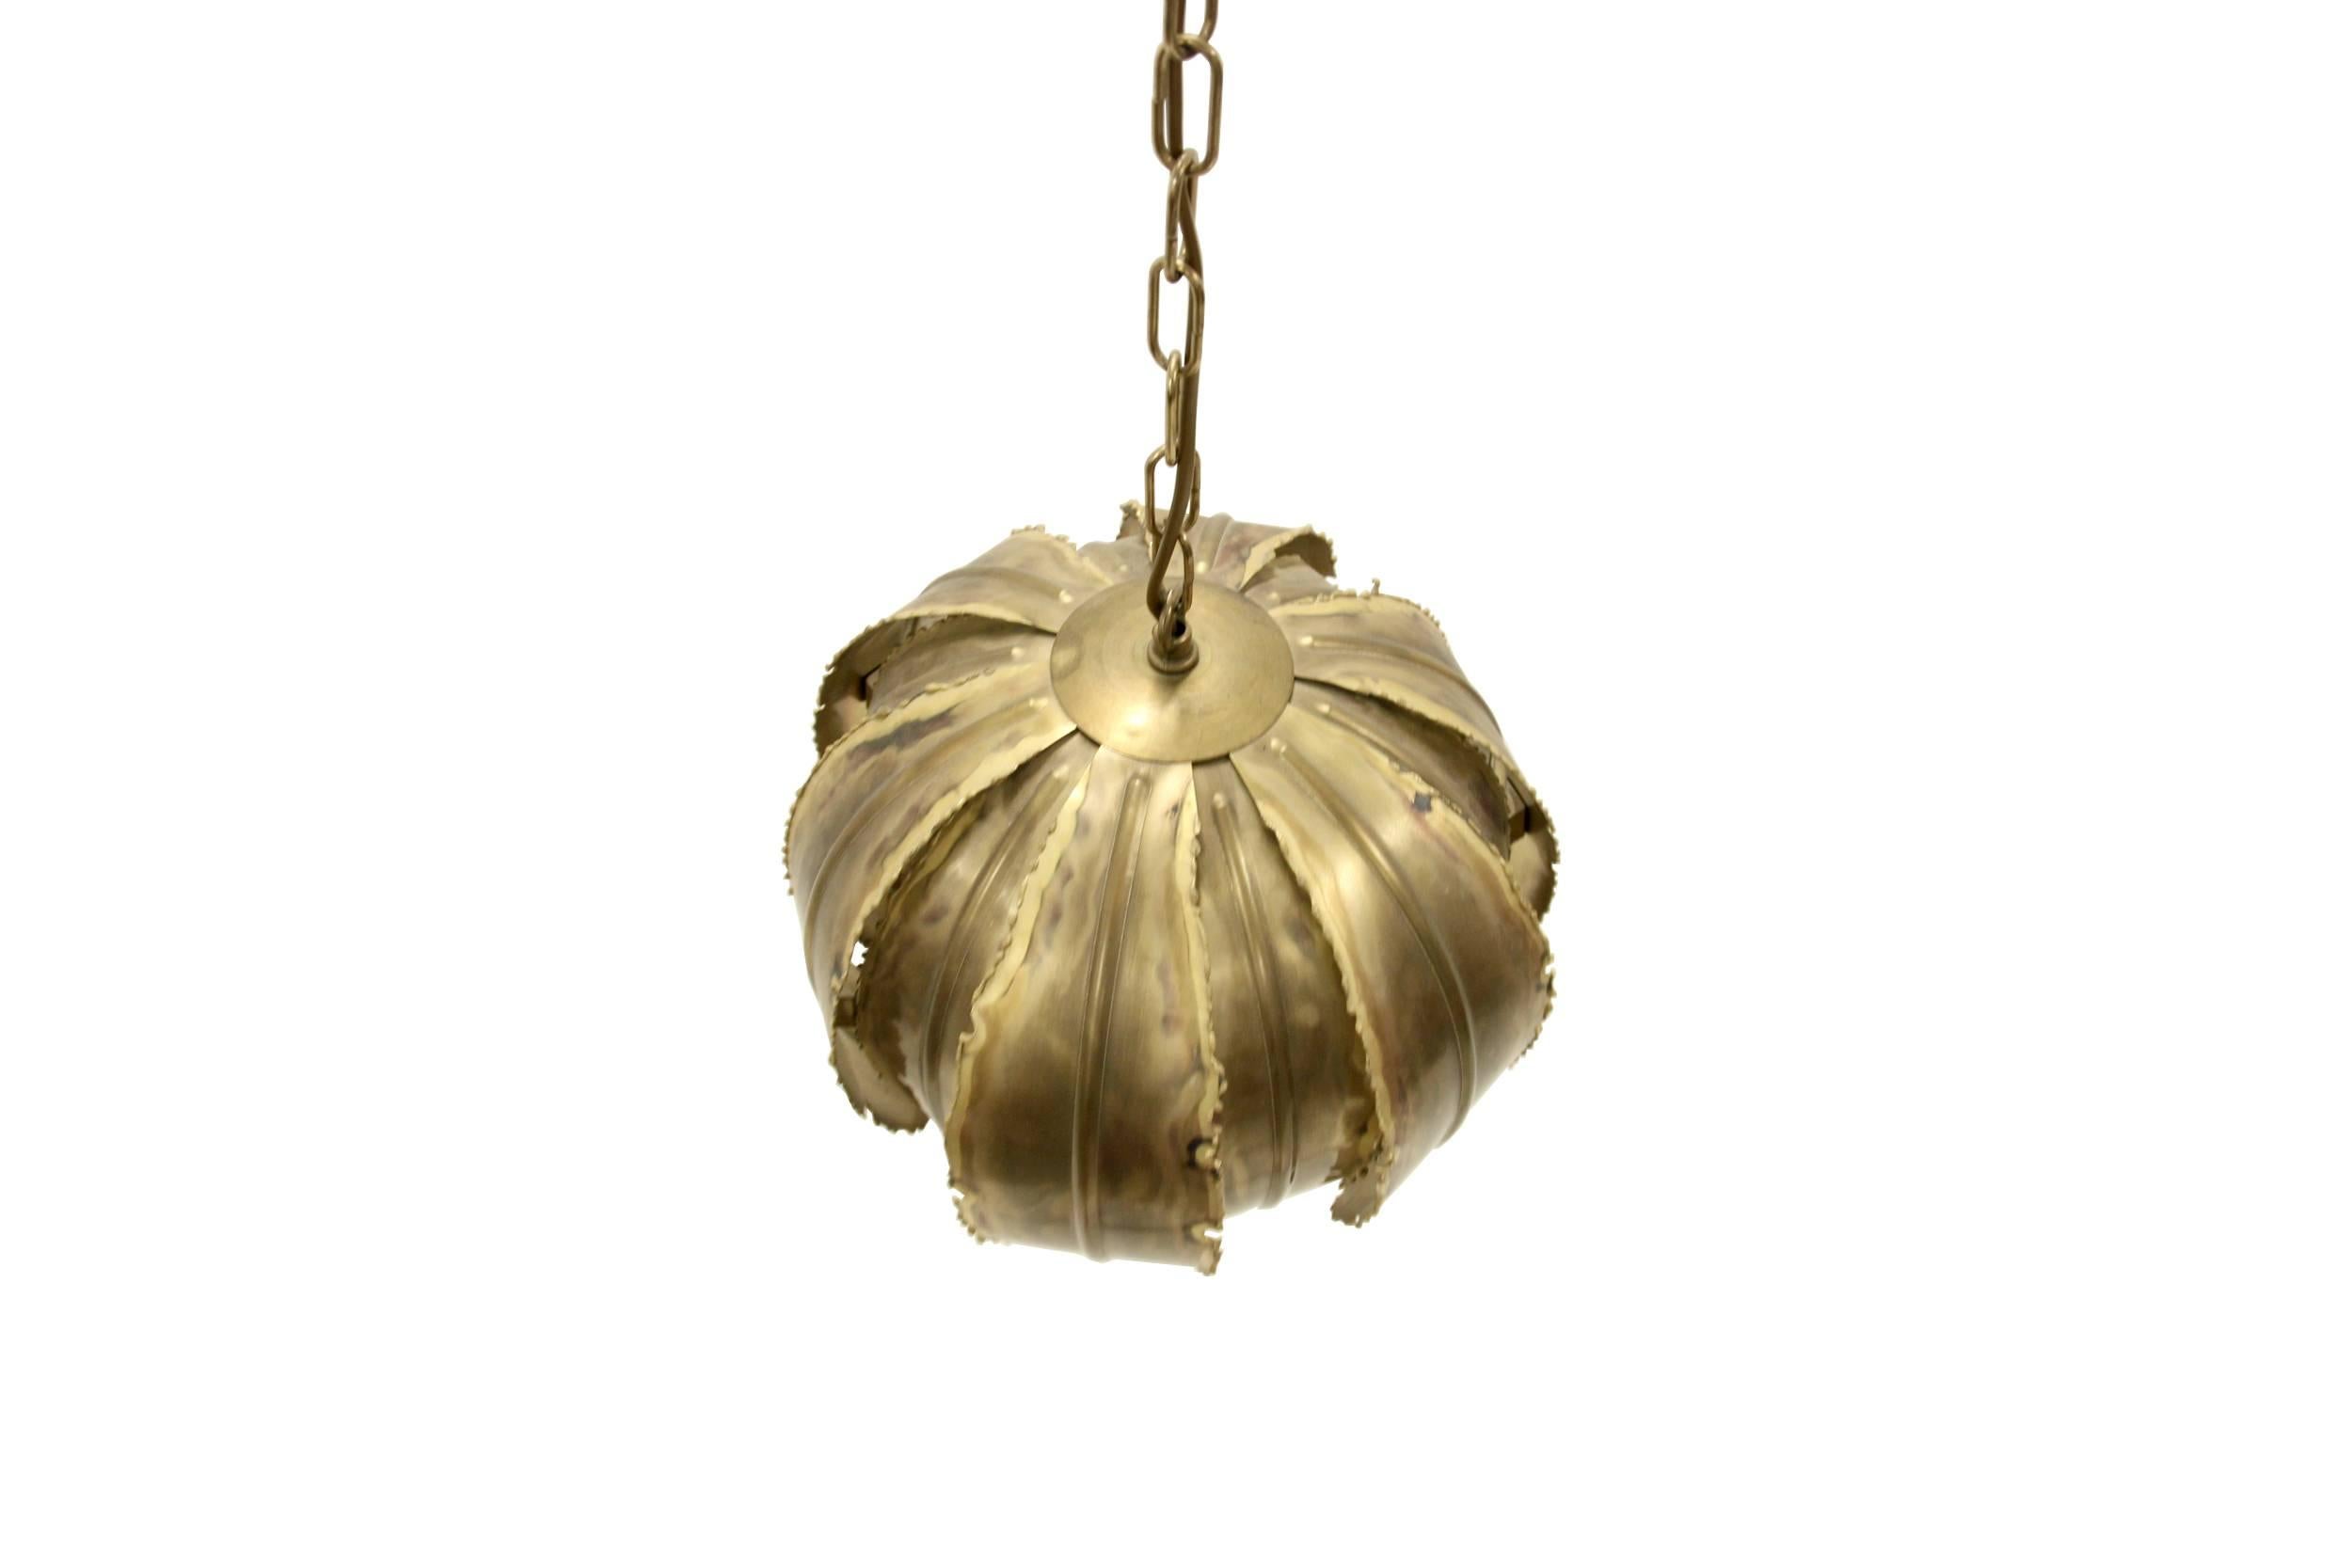 Patinated Ceiling Pendant 'Poppy' by Svend Aage Holm Sorensen, 1970s